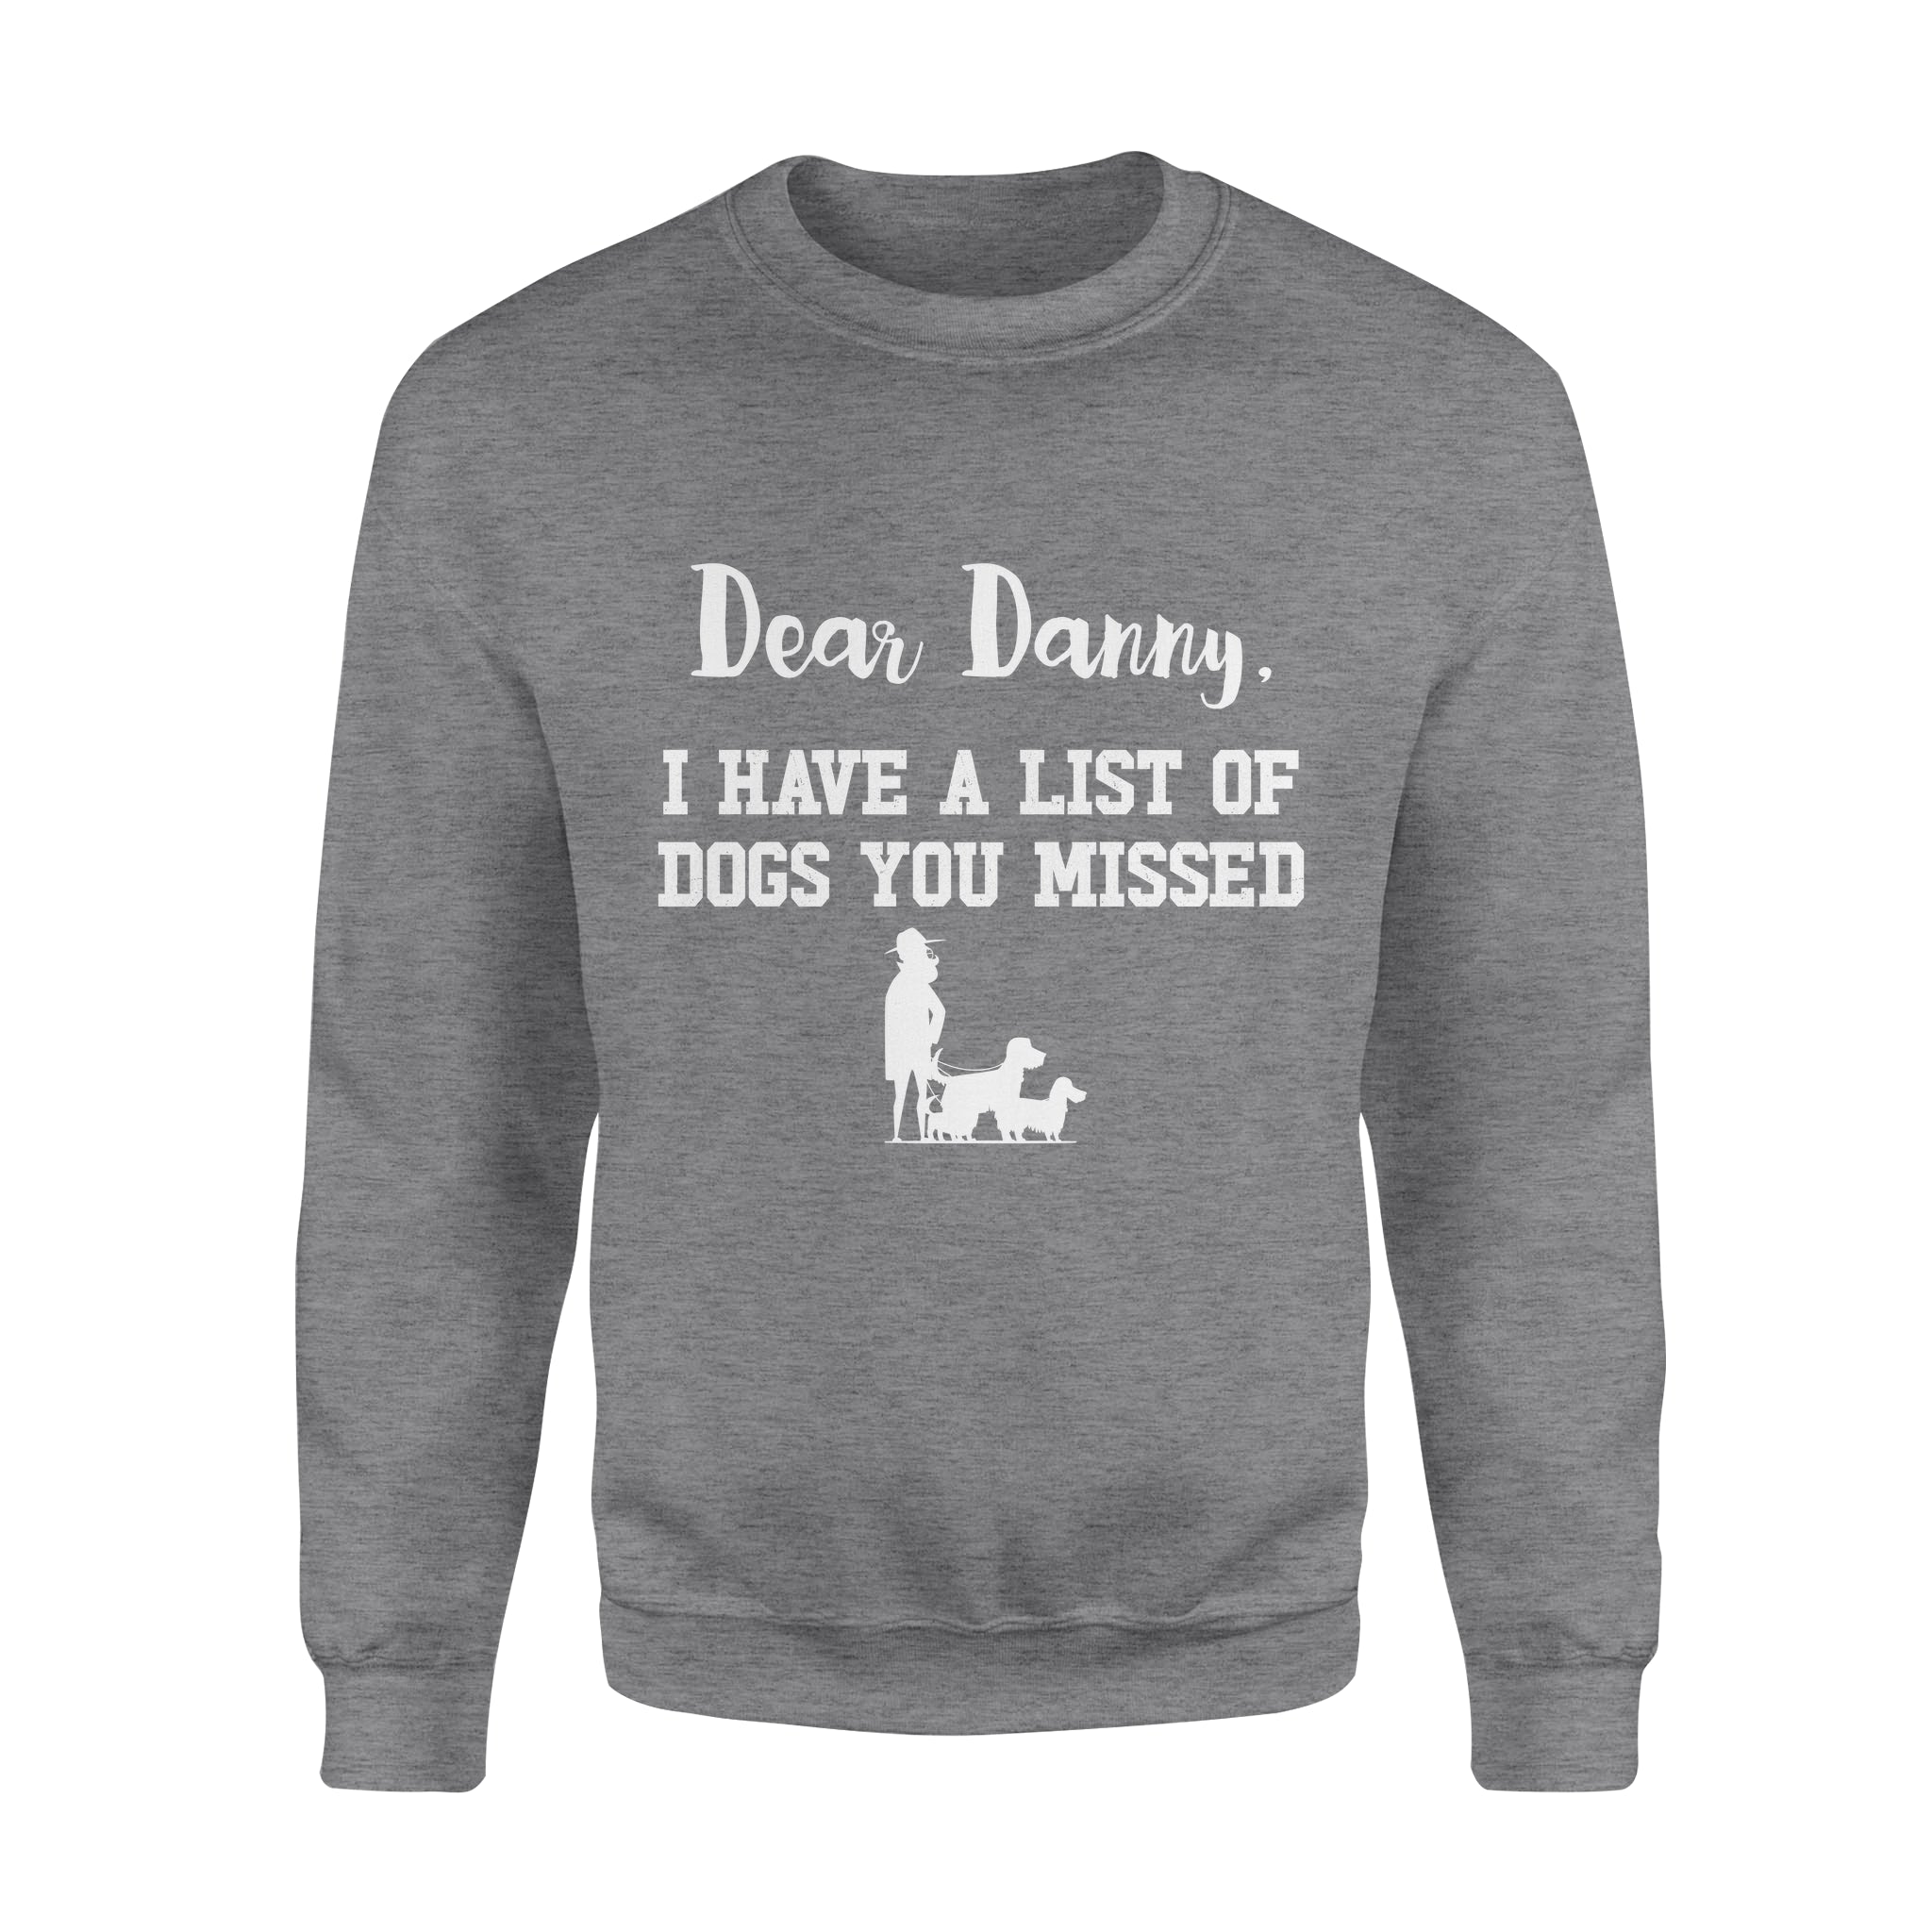 Personalized Dog Gift Idea - I Have A List Of Dogs You Missed - Standard Crew Neck Sweatshirt